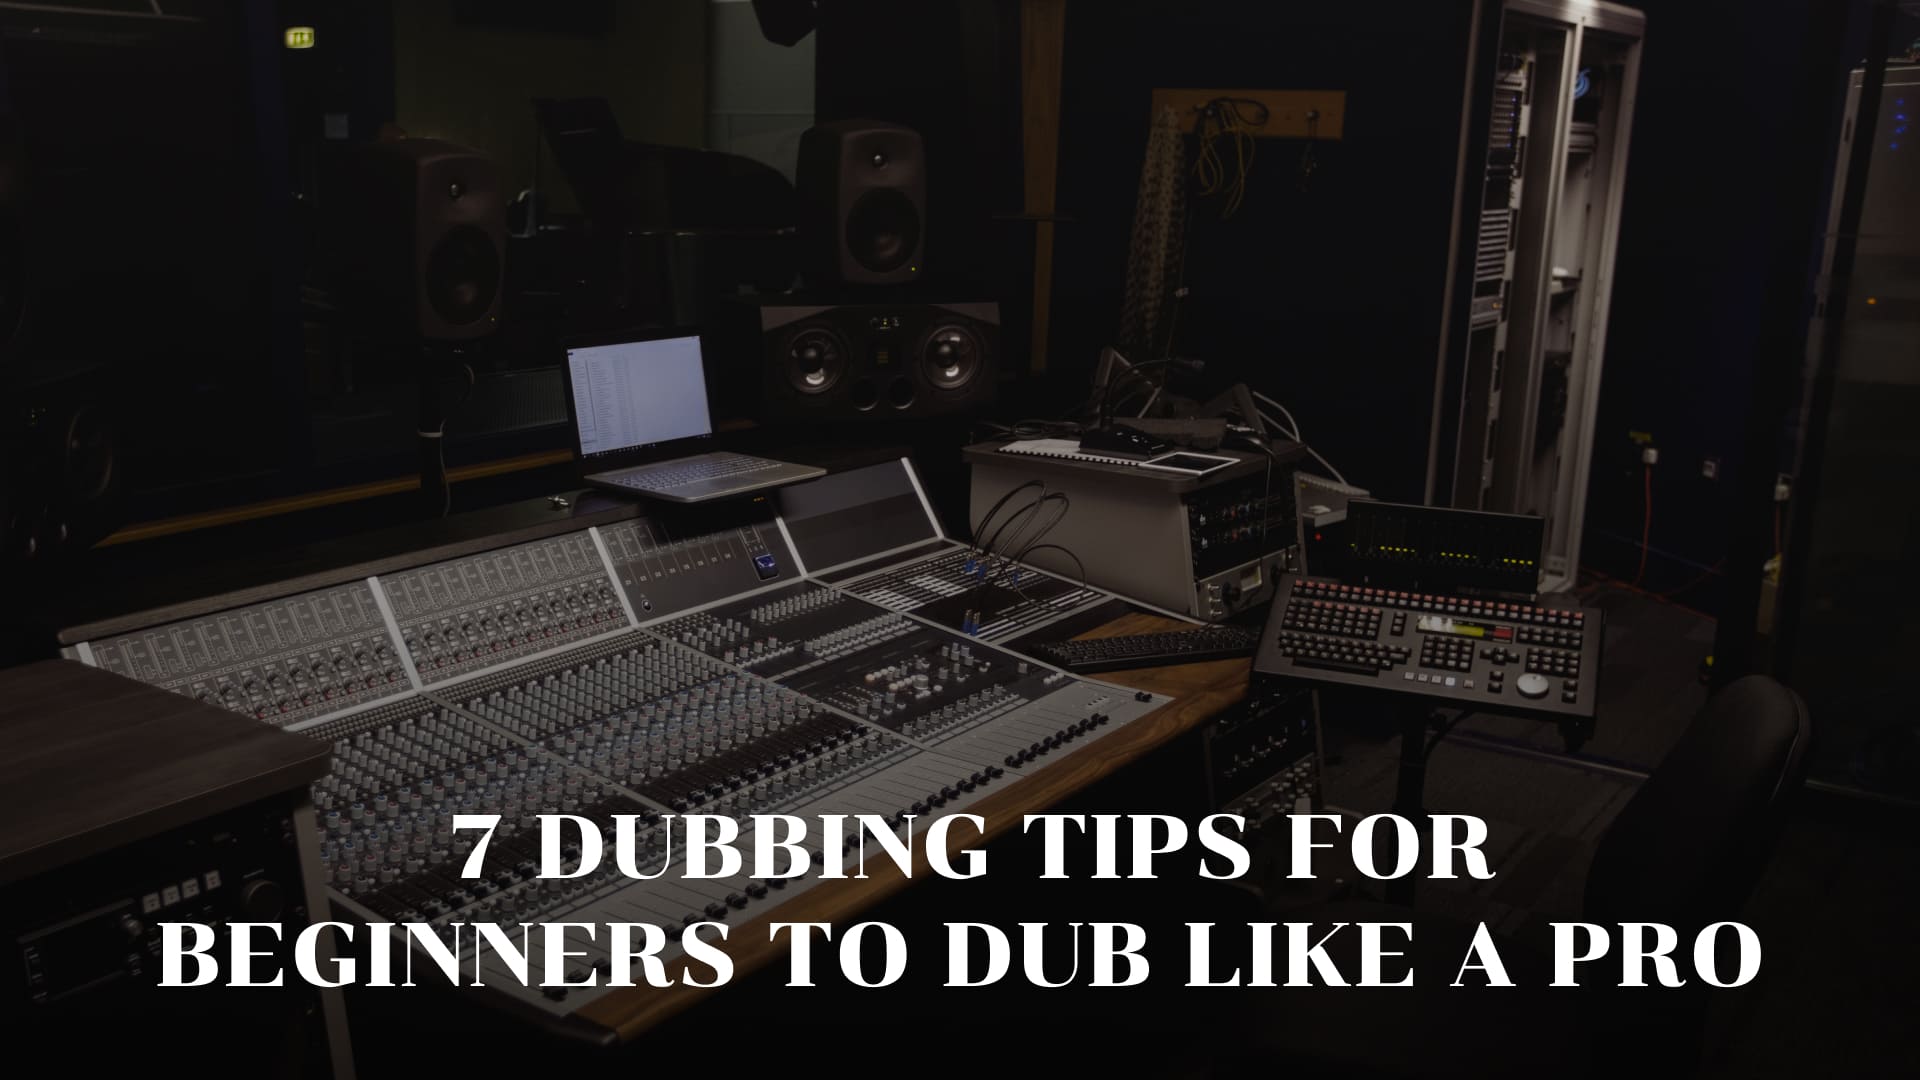 7 Dubbing Tips for Beginners to Dub like a Pro